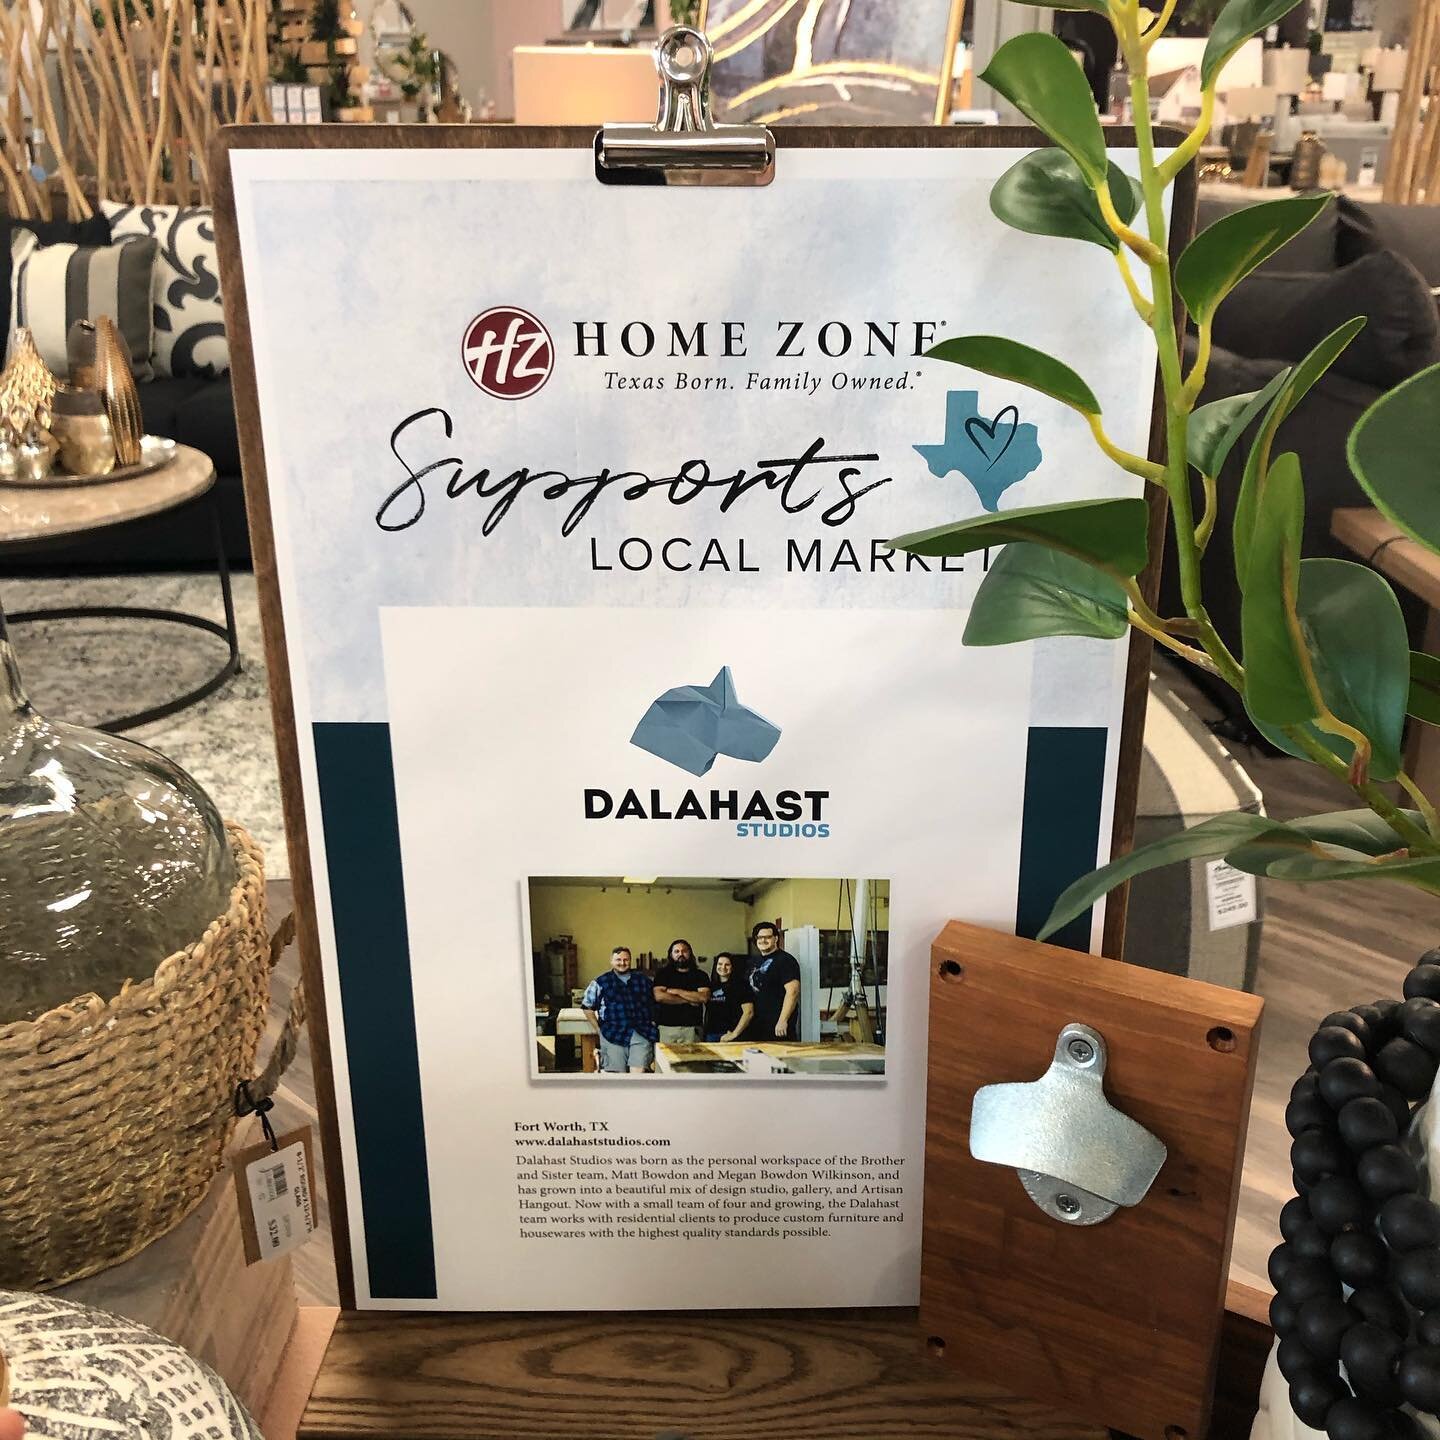 The big announcement is here! You can now buy three of our products at @homezone.furniture &lsquo;s brand new Hudson Oaks/Weatherford location!
.
We are thrilled to to be part of Home Zone&rsquo;s new Support Local Markets initiative to promote Texas